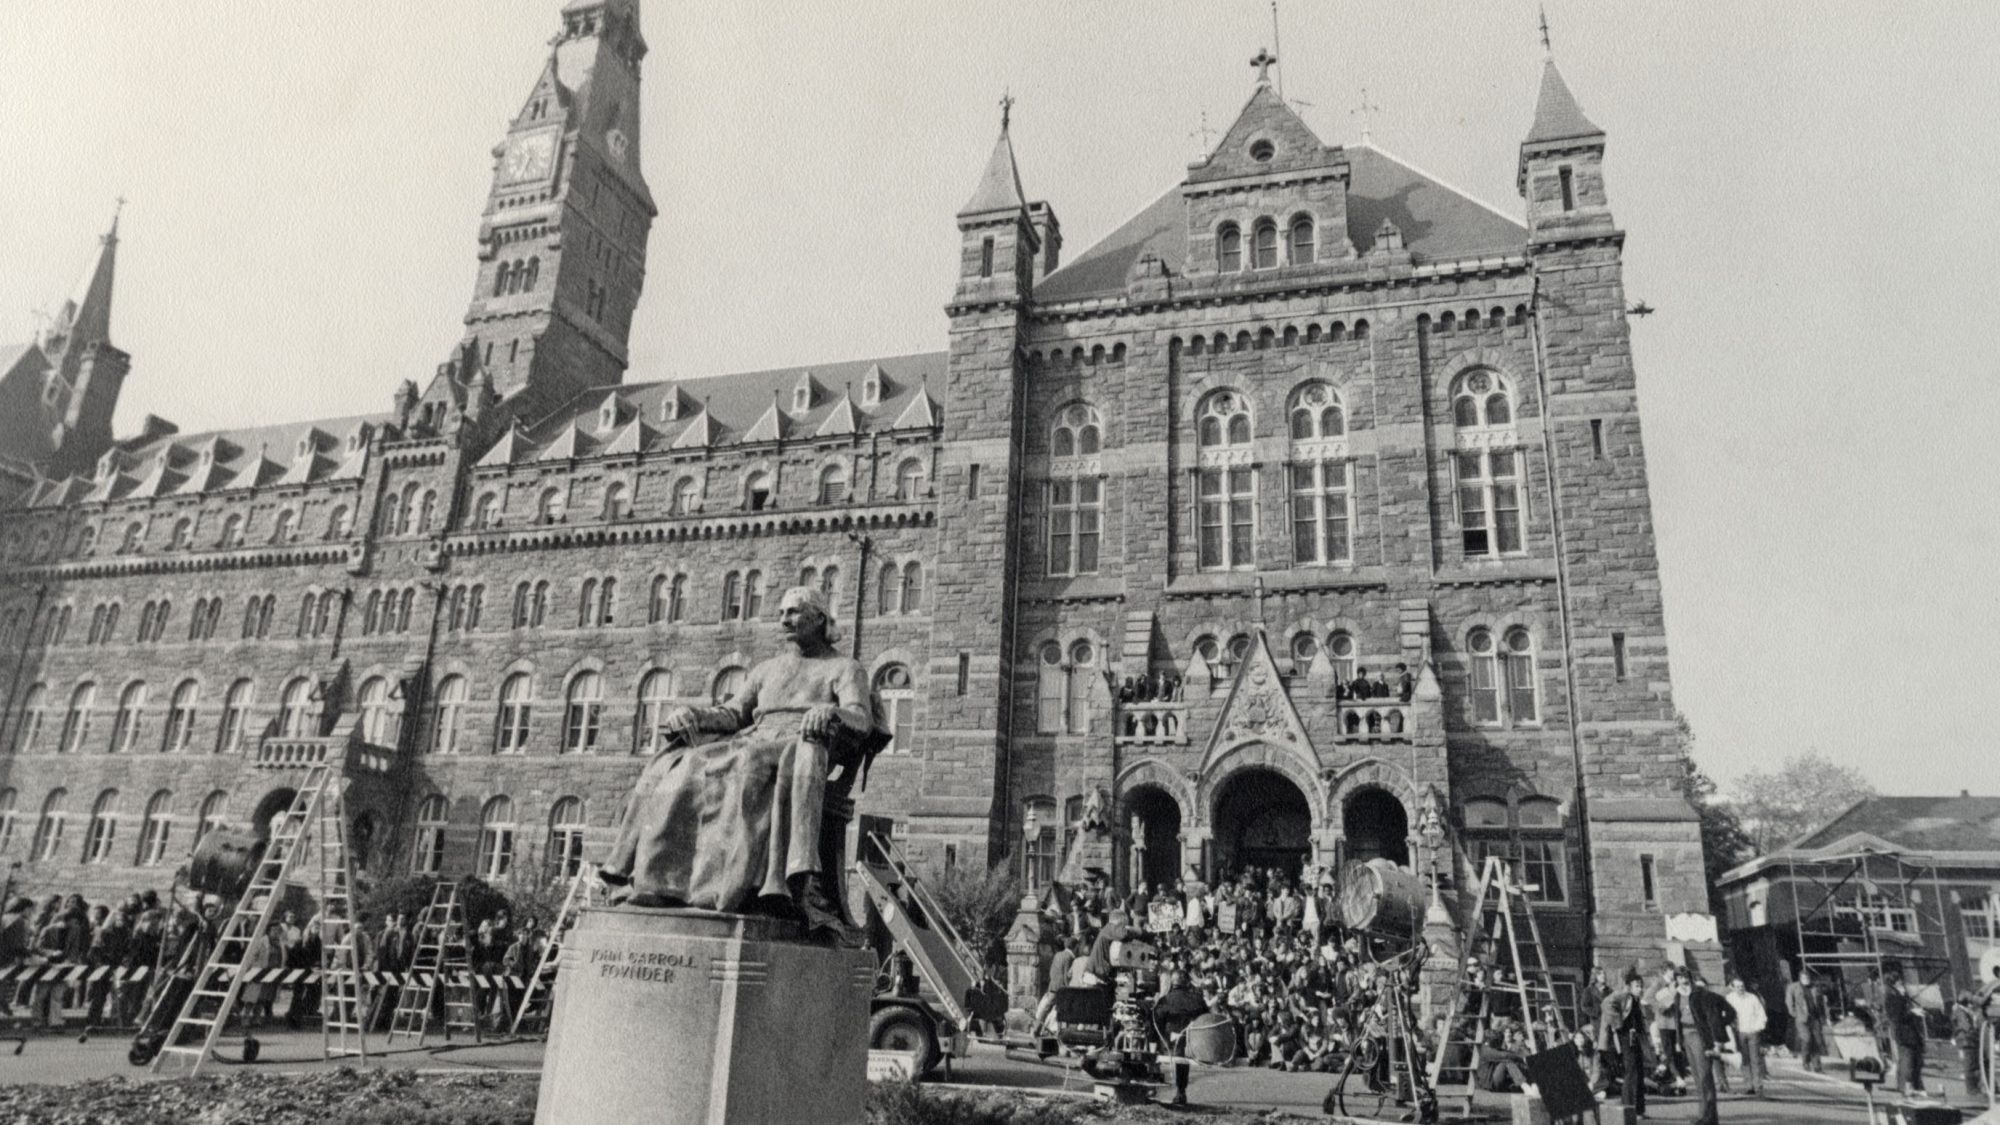 Black and white image of Healy Hall during Exorcist filming